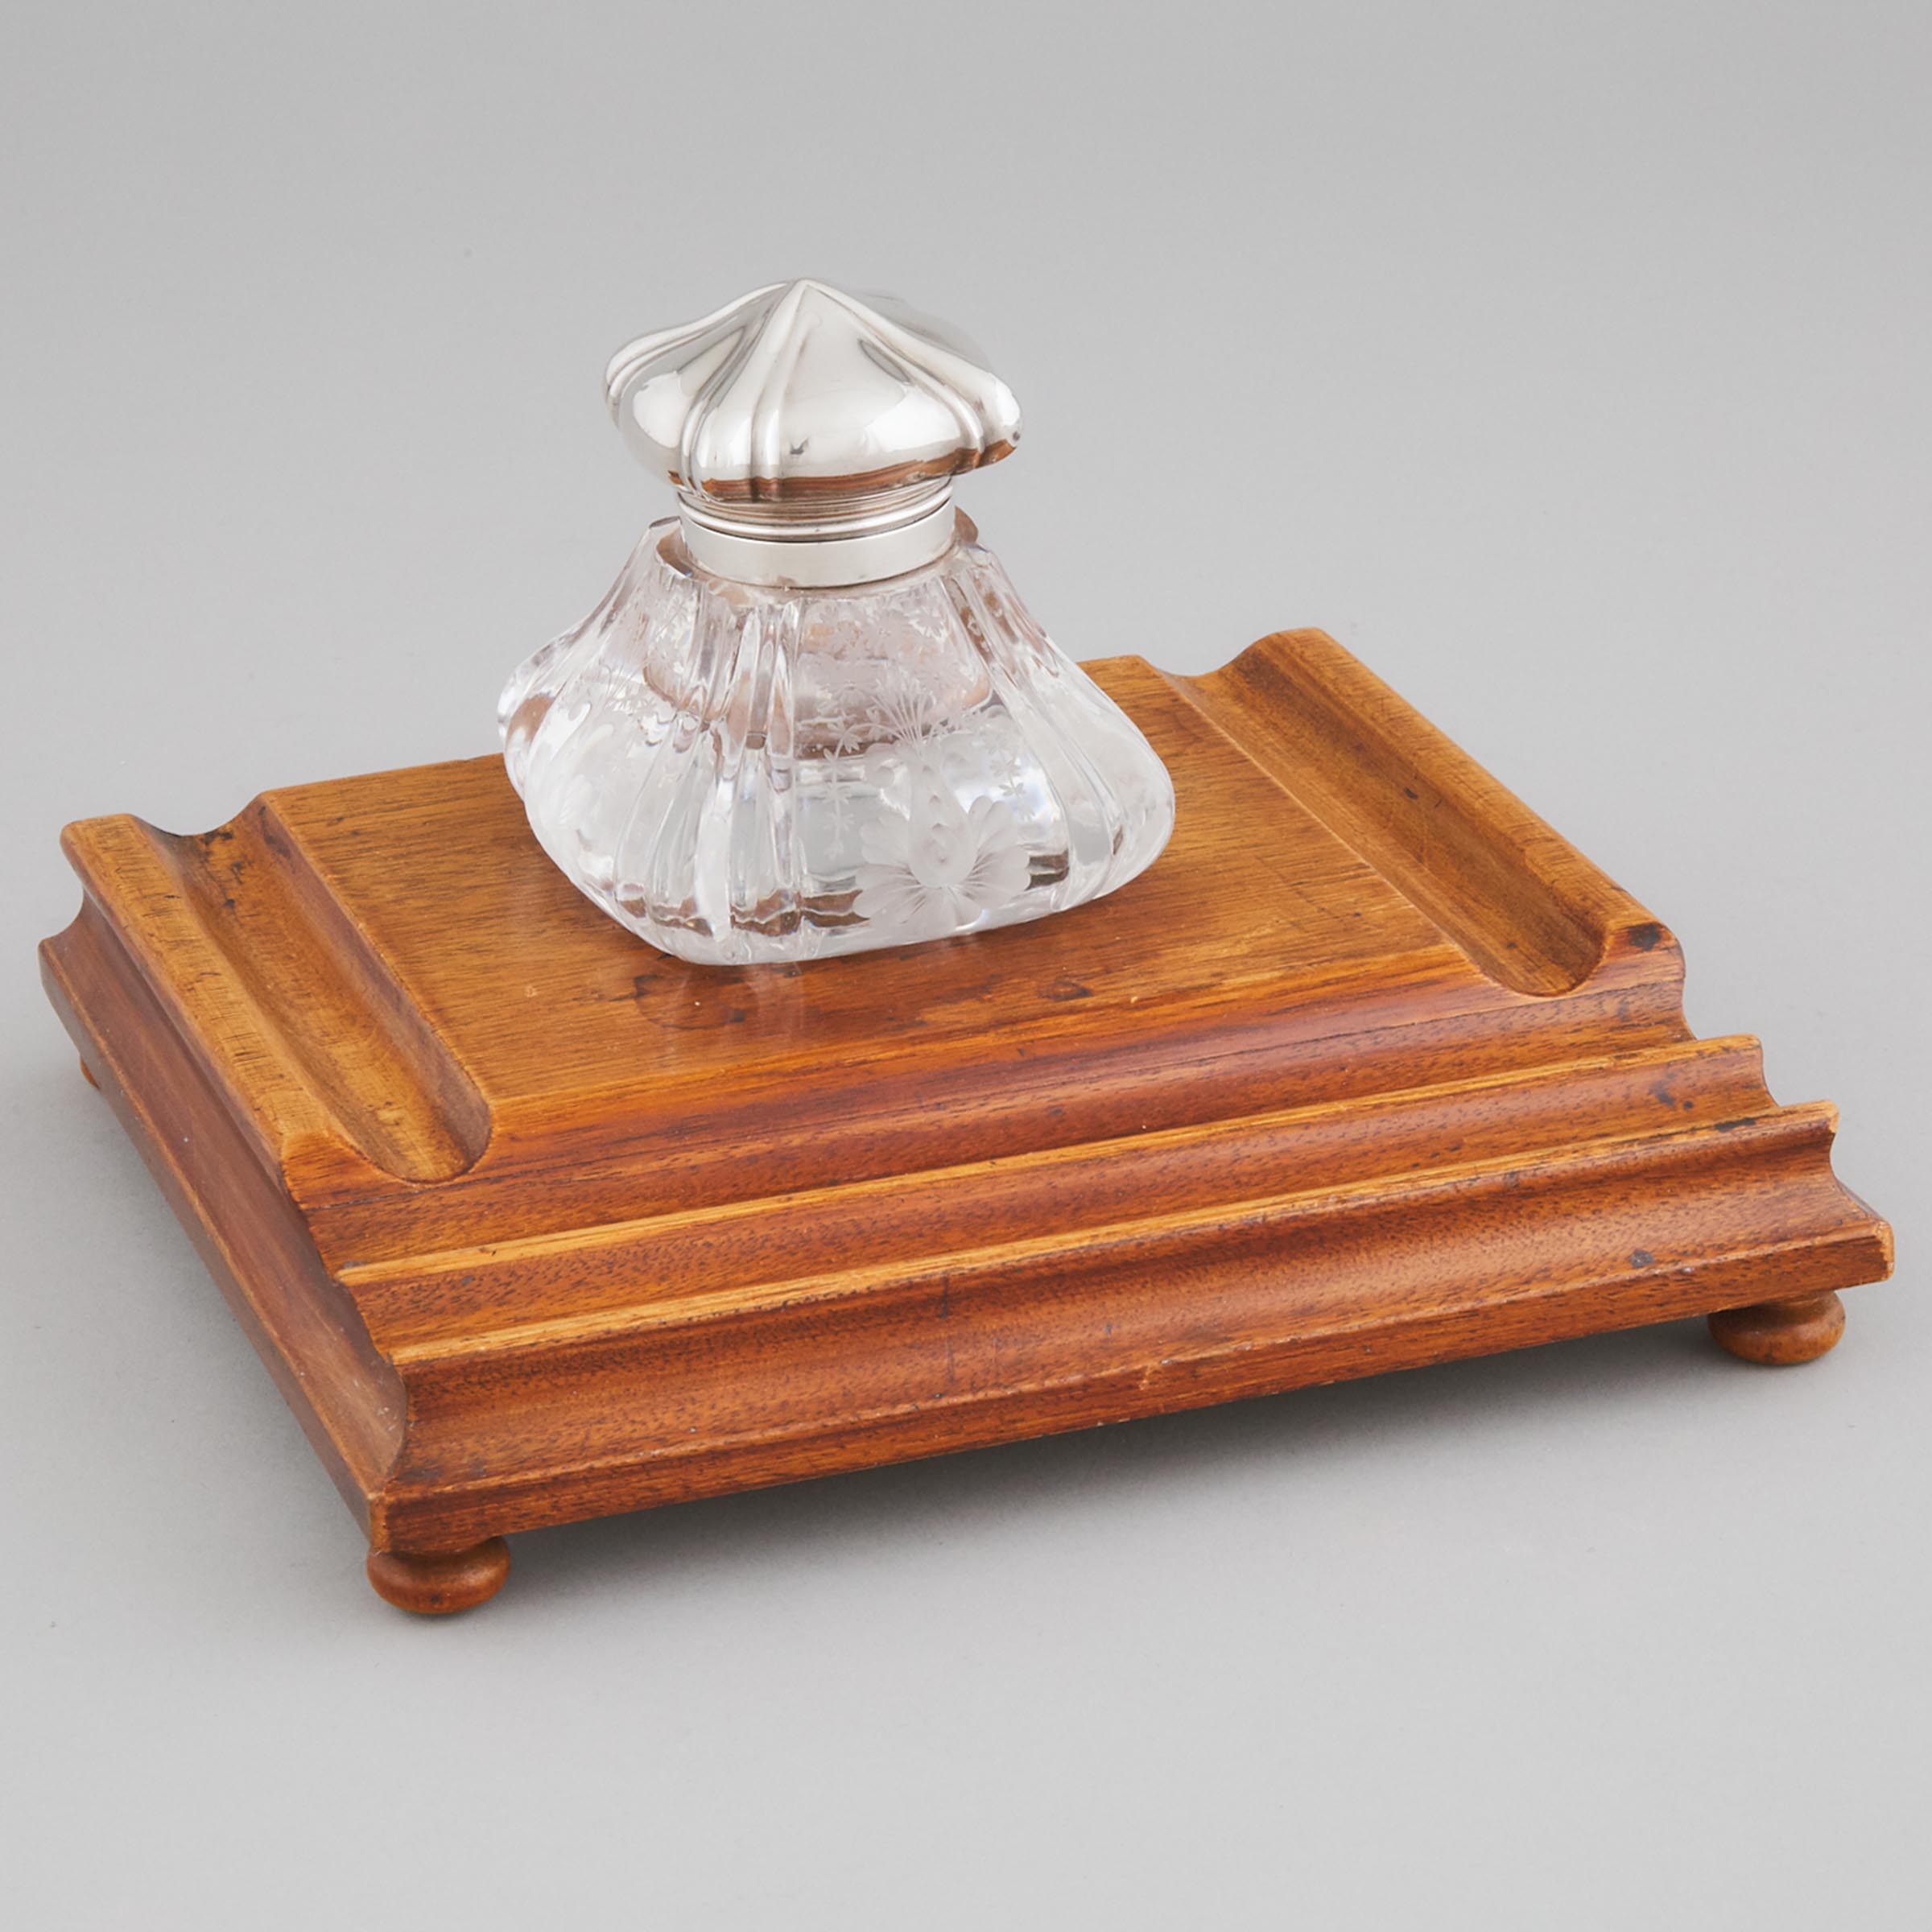 American Silver Mounted Engraved Glass and Carved Oak Inkstand, Gorham Mfg. Co., Providence, R.I., early 20th century